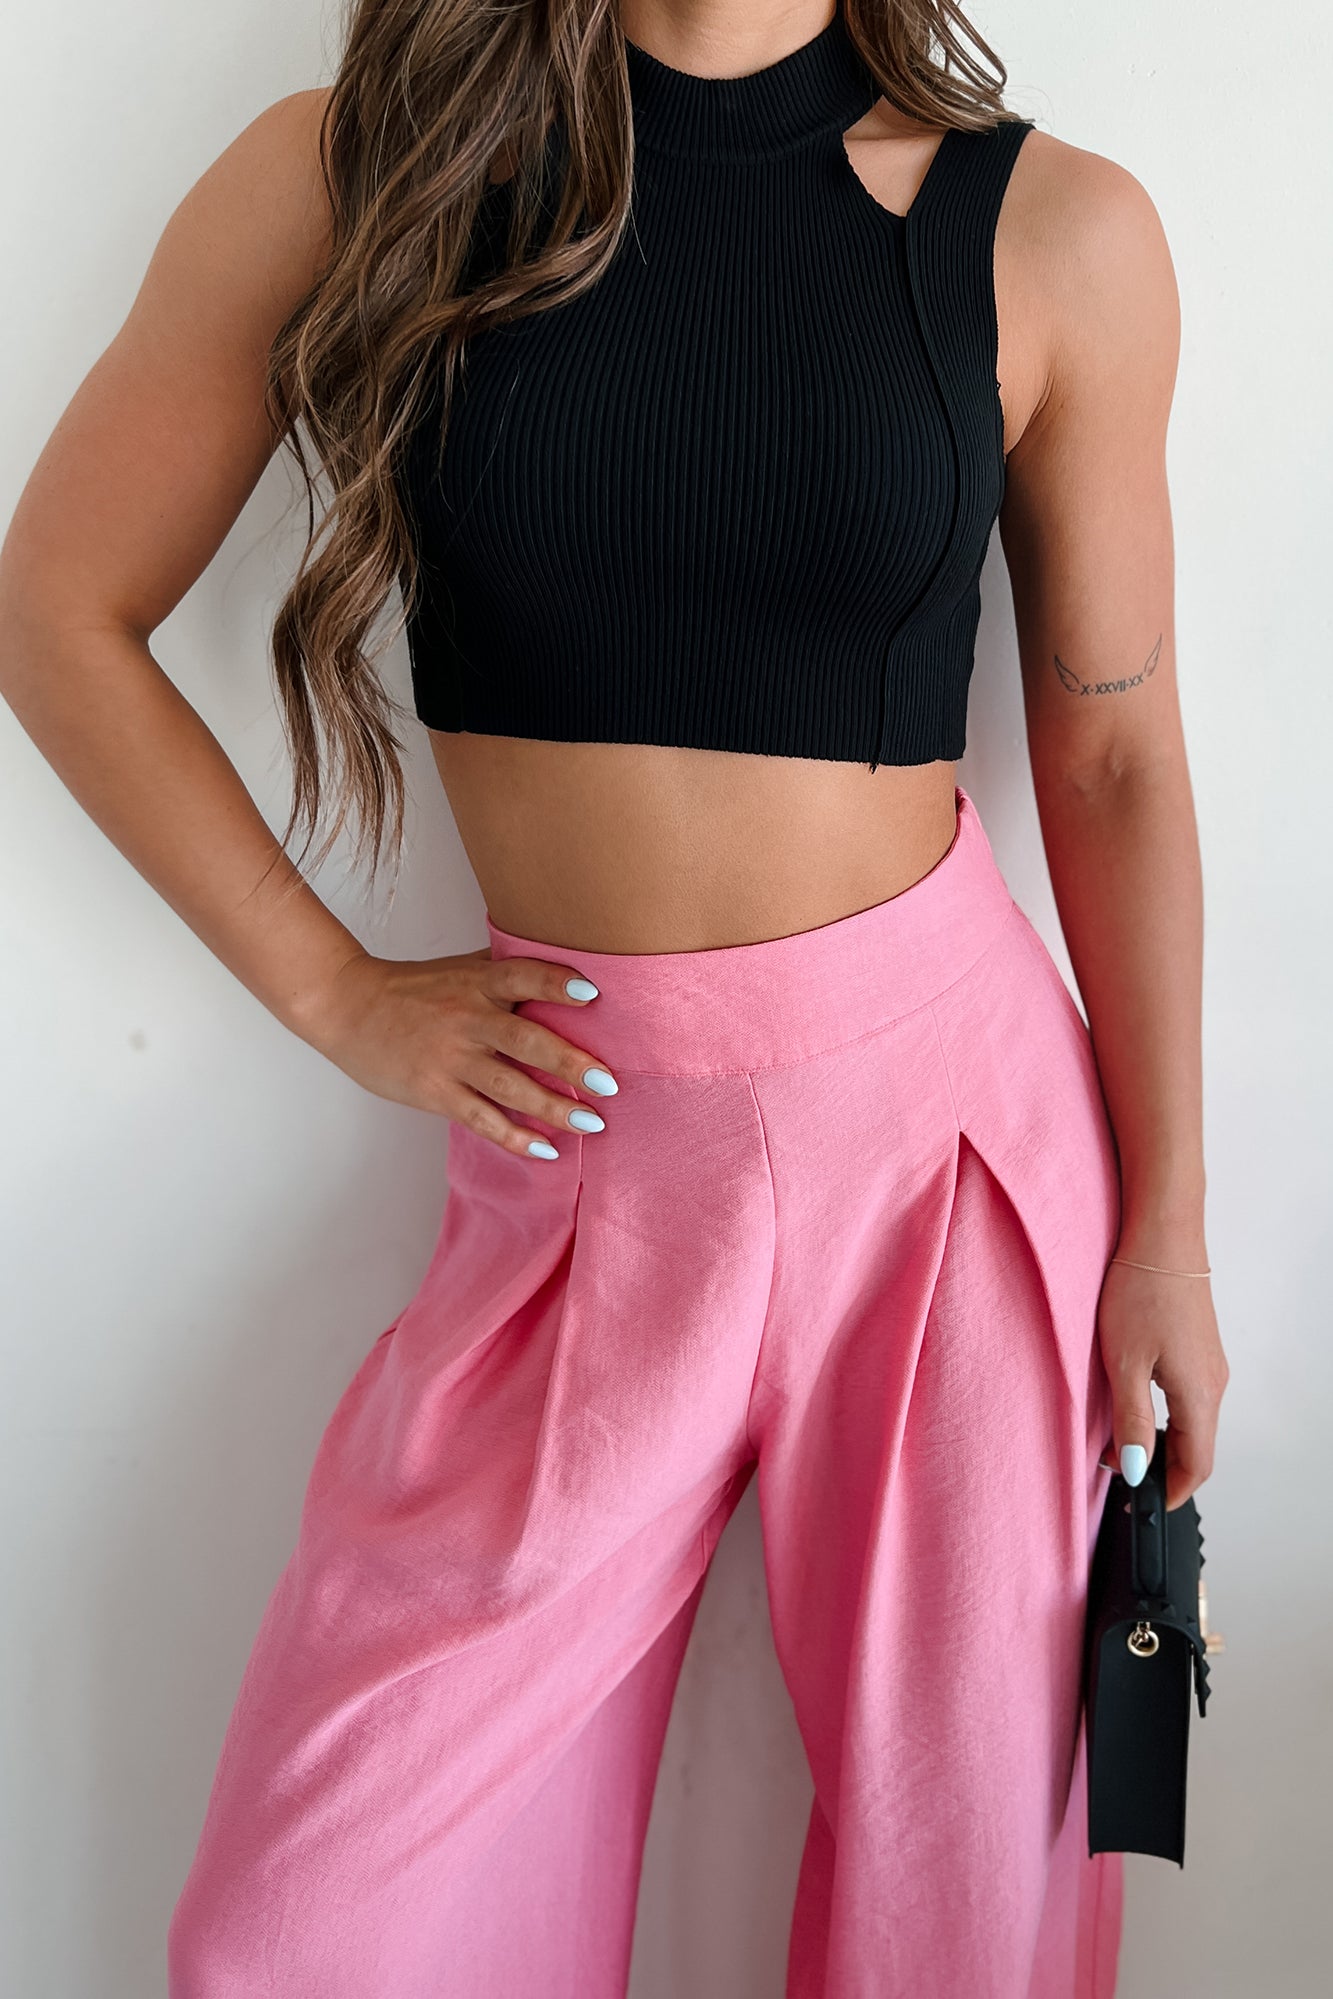 Forming Connections Ribbed Cut-Out Crop Top (Black) - NanaMacs